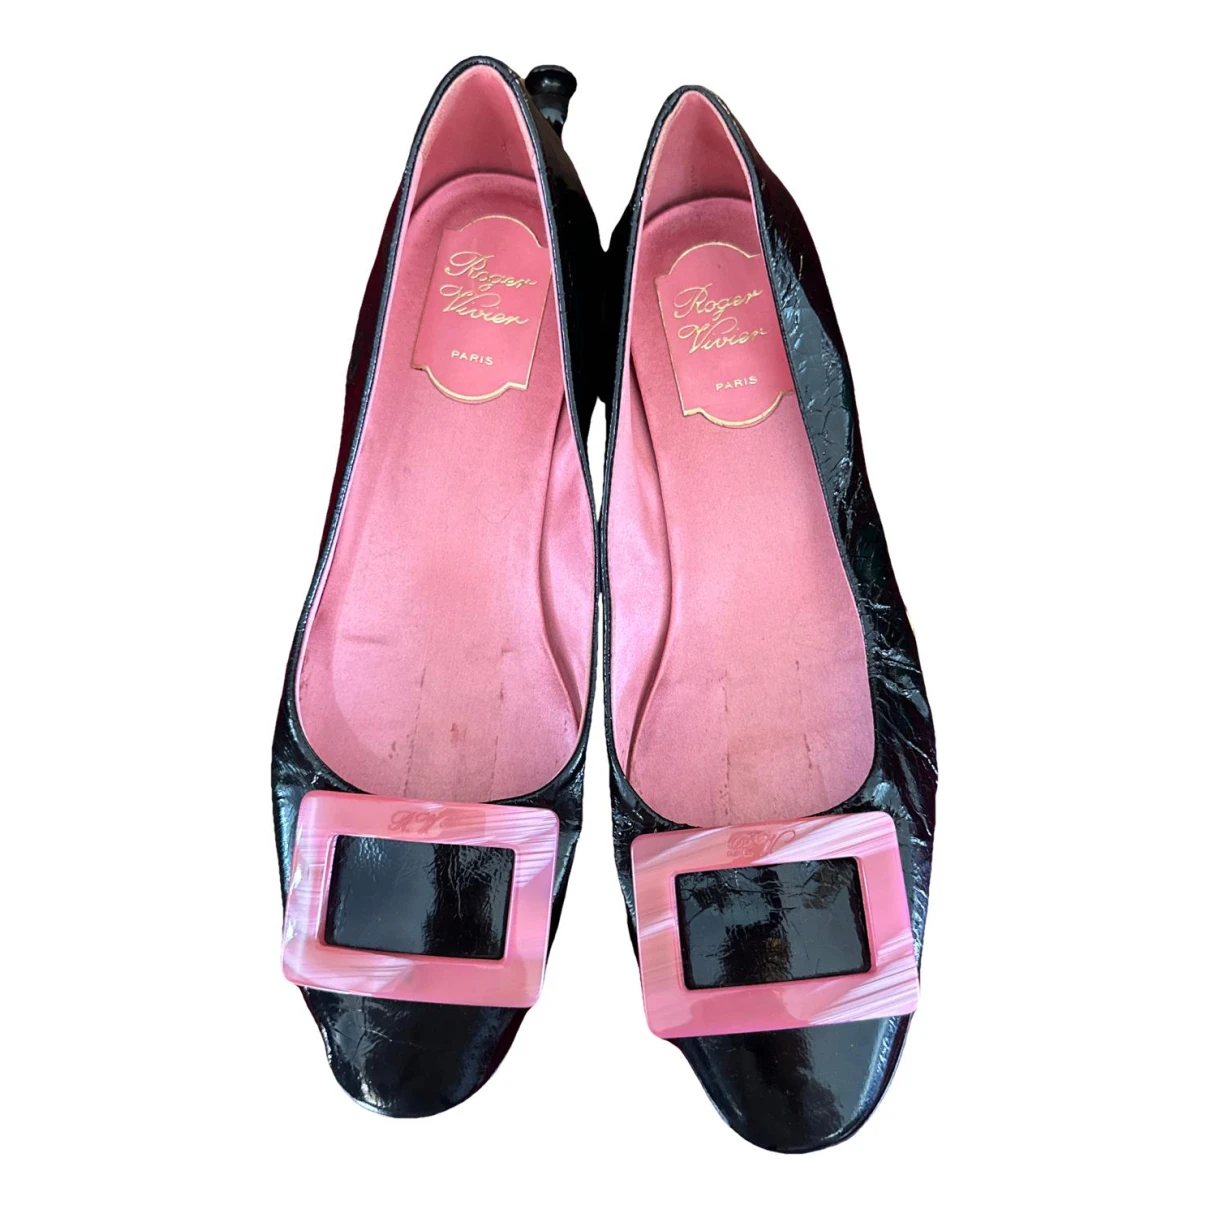 Pre-owned Roger Vivier Patent Leather Ballet Flats In Black